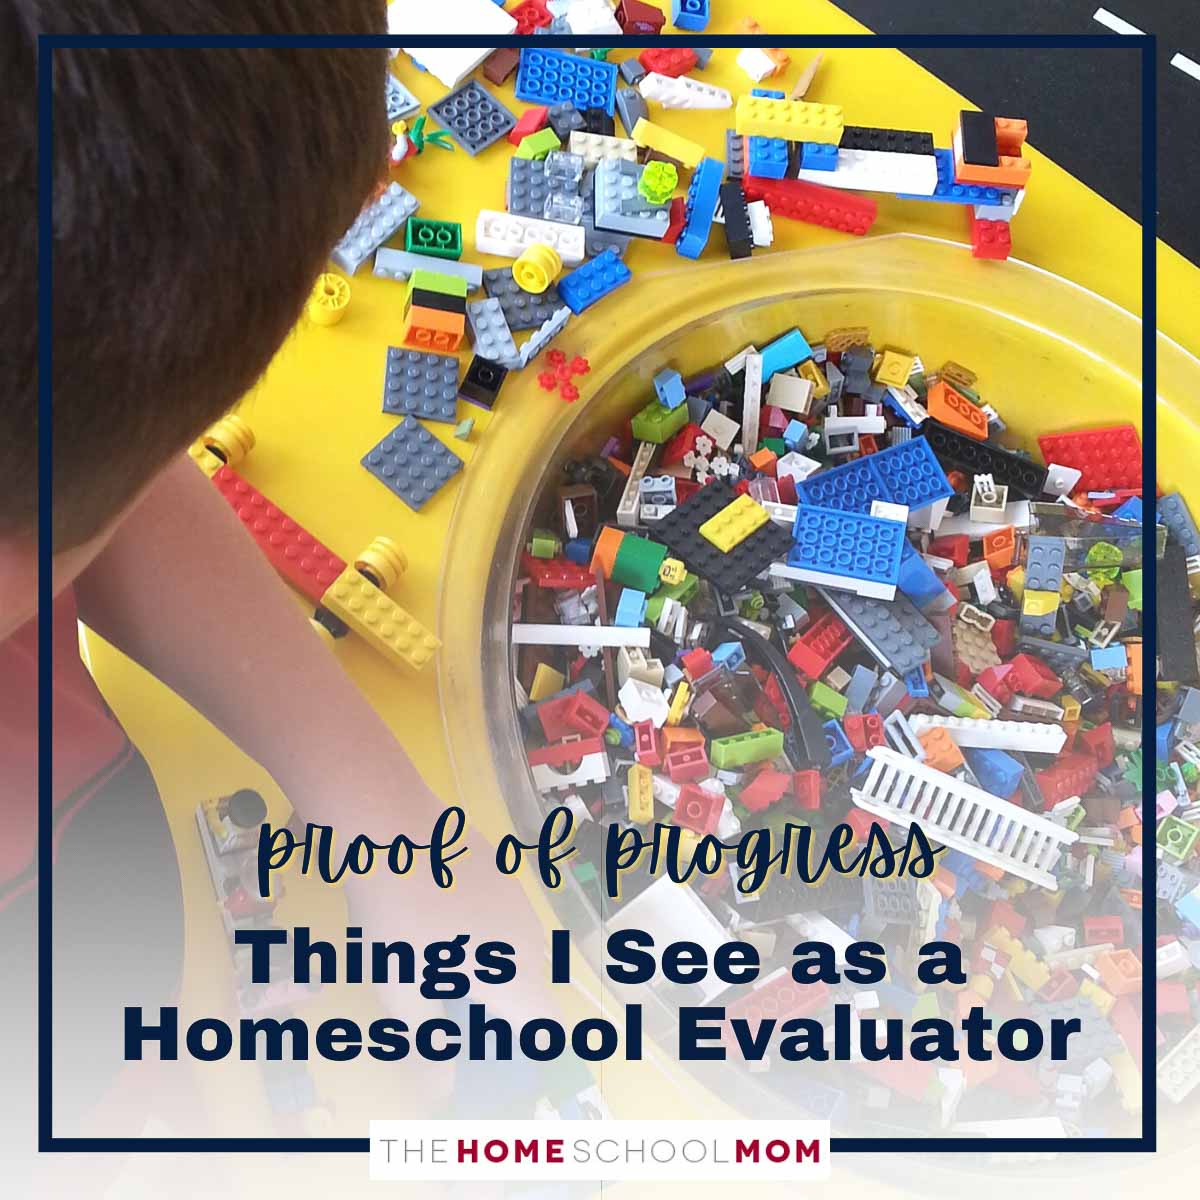 proof of progress: things I see as a homeschool evaluator